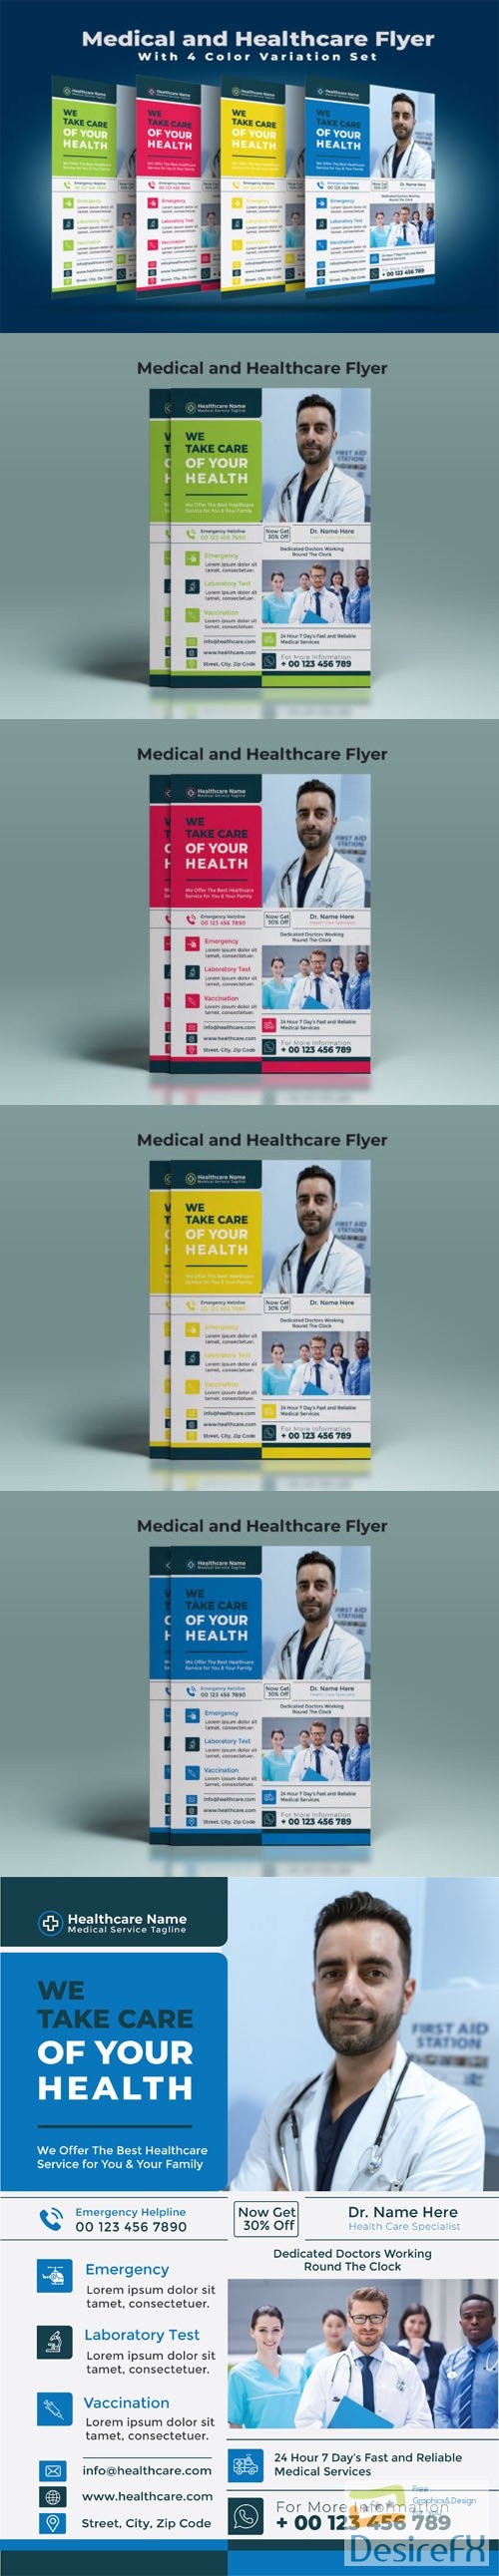 Medical and Healthcare A4 Flyers Vector Templates